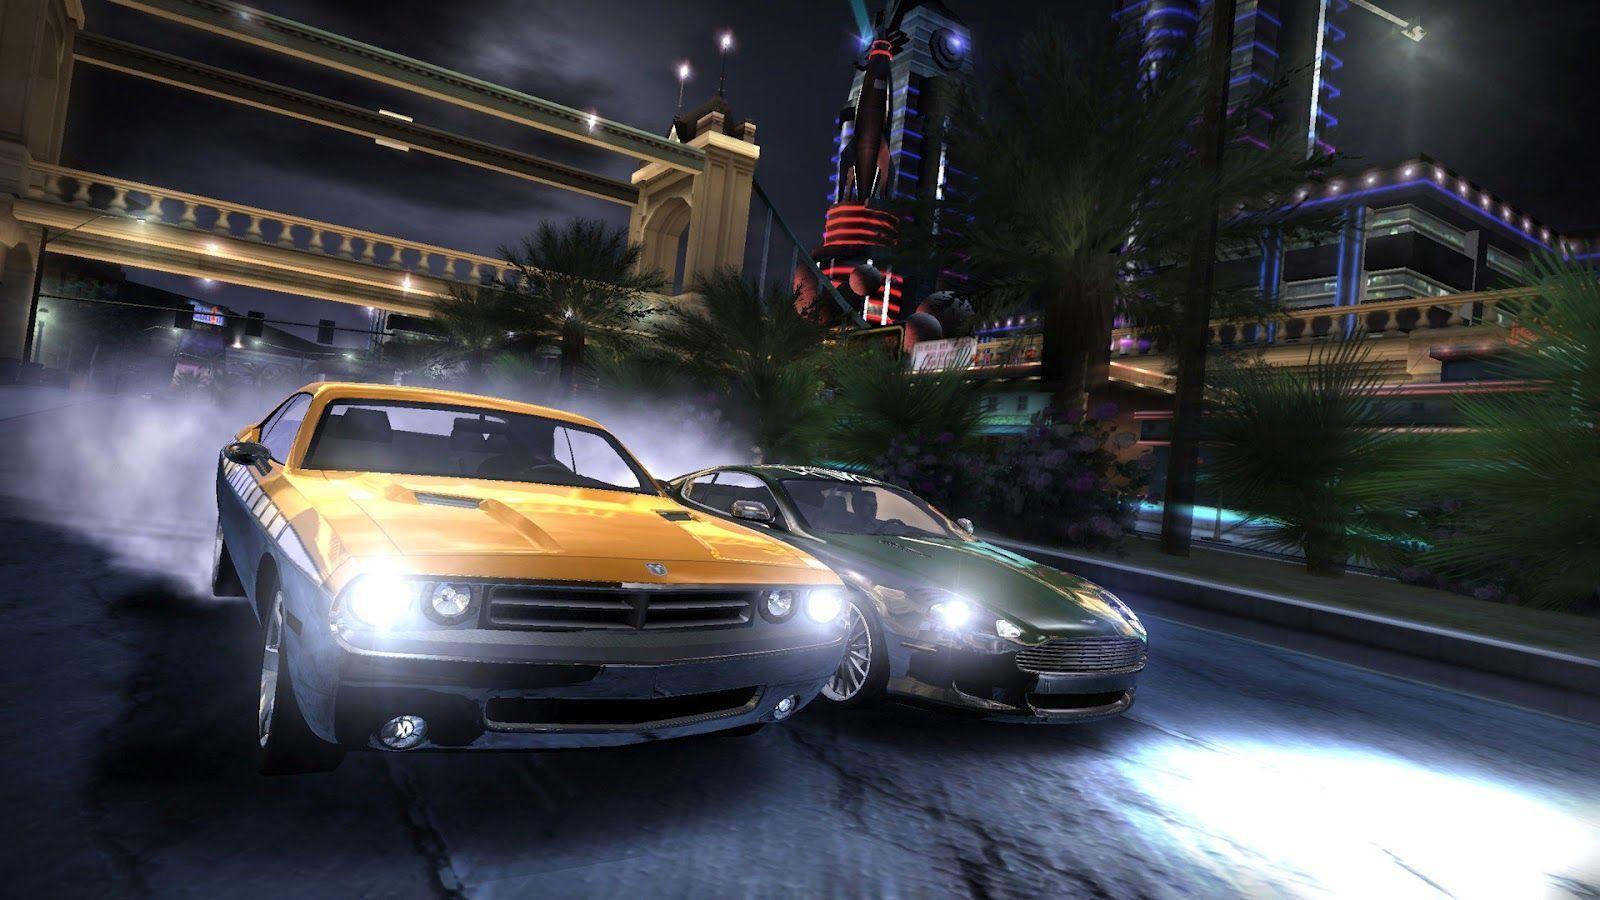 HD need for speed wallpapers  Peakpx